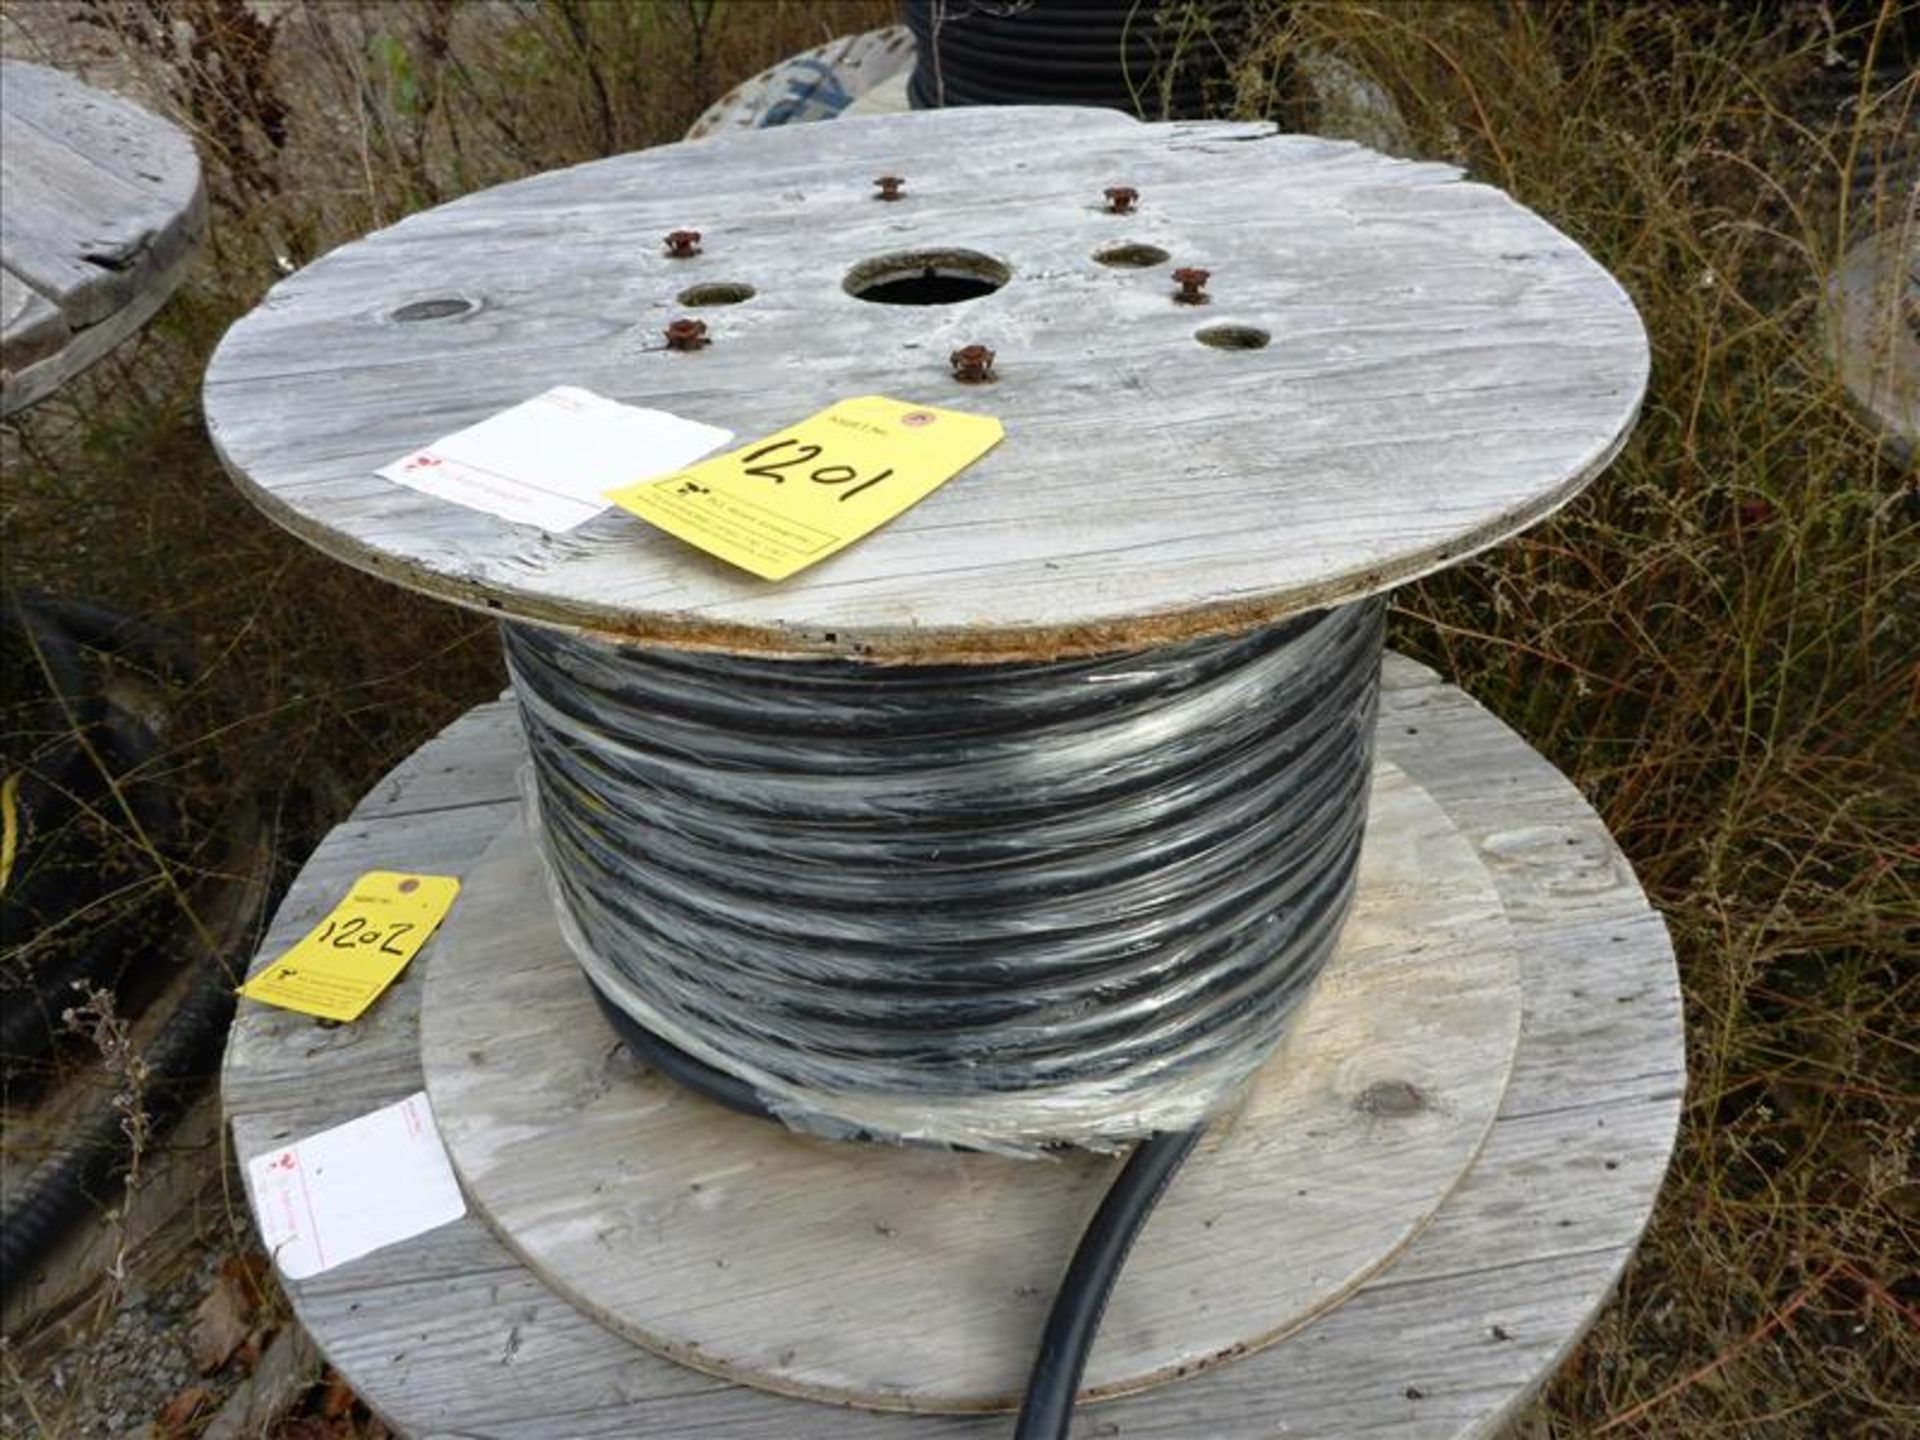 reel of electrical cable, approx. 100 ft., Lapp Kabel Stutt. Olflex Tray II CY P/N 2214250 (L) 14